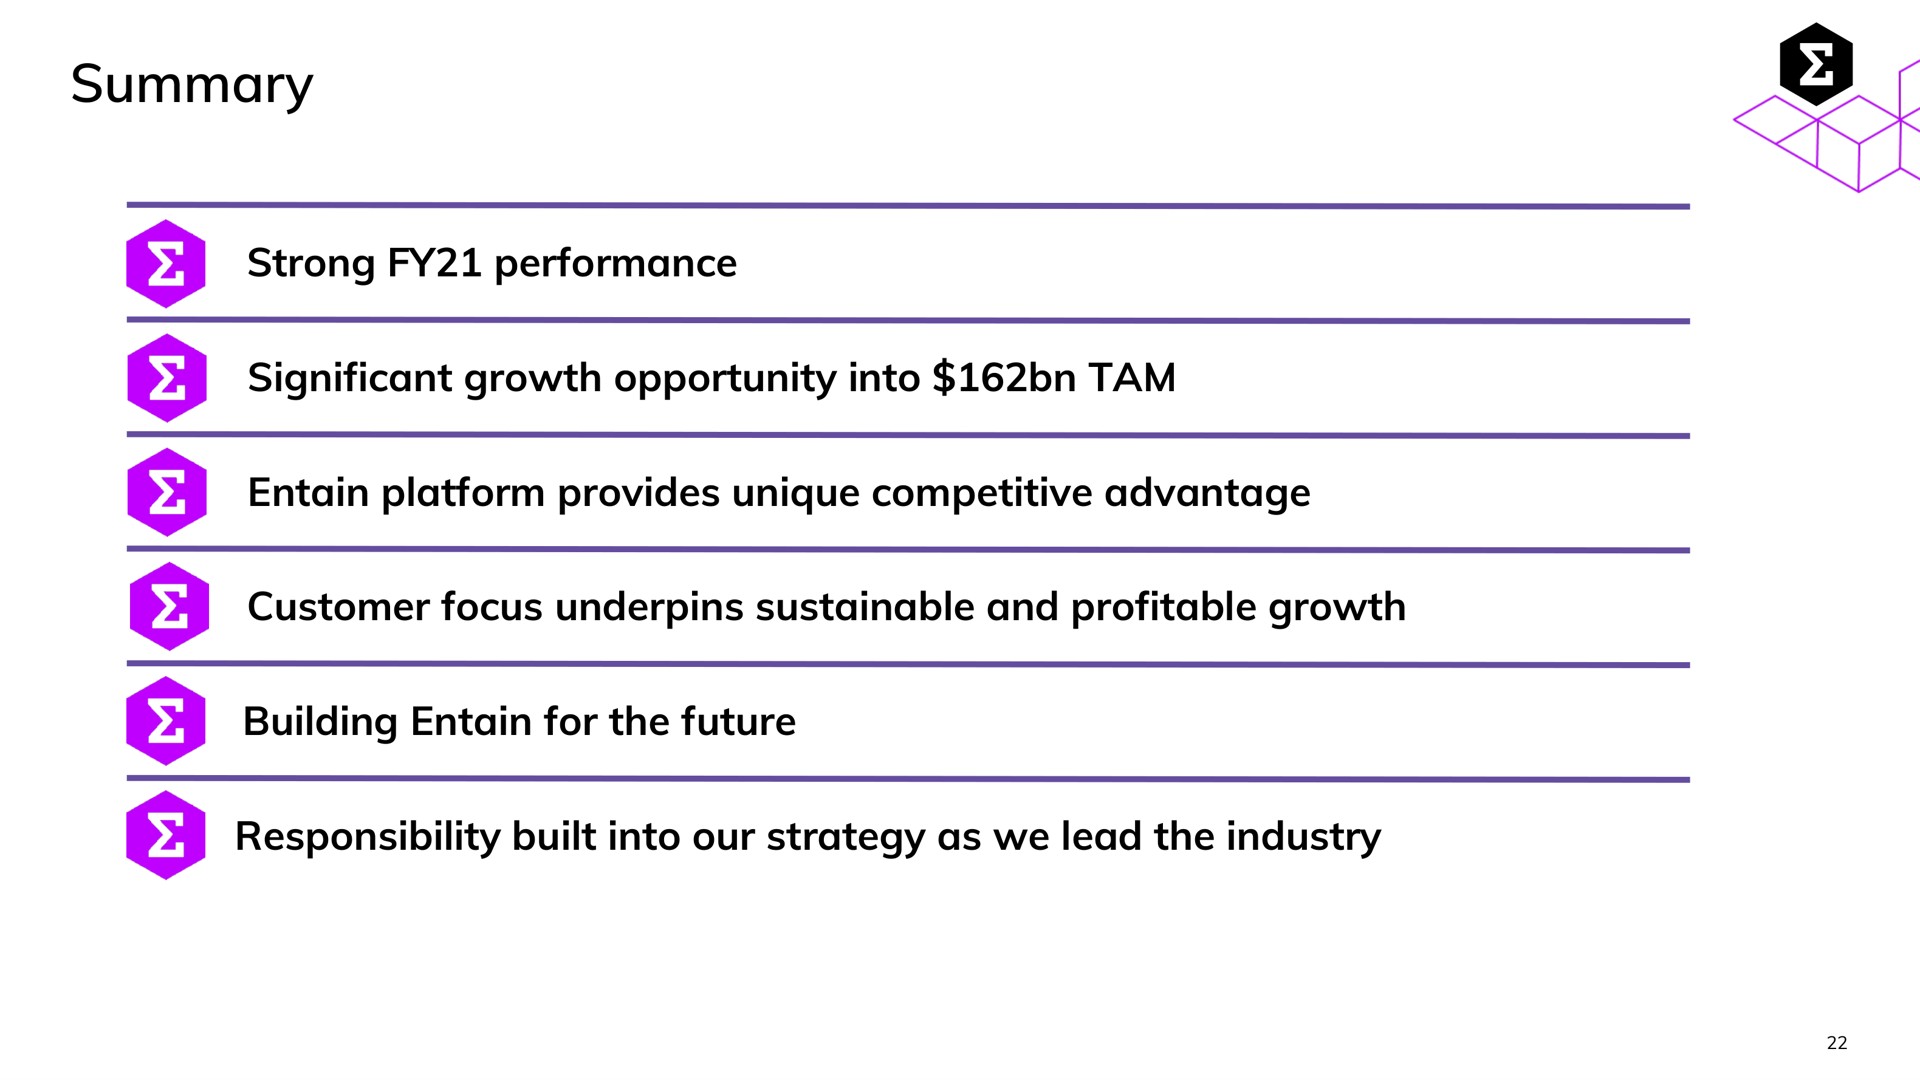 summary strong performance significant growth opportunity into tam platform provides unique competitive advantage customer focus underpins sustainable and profitable growth building for the future responsibility built into our strategy as we lead the industry | Entain Group